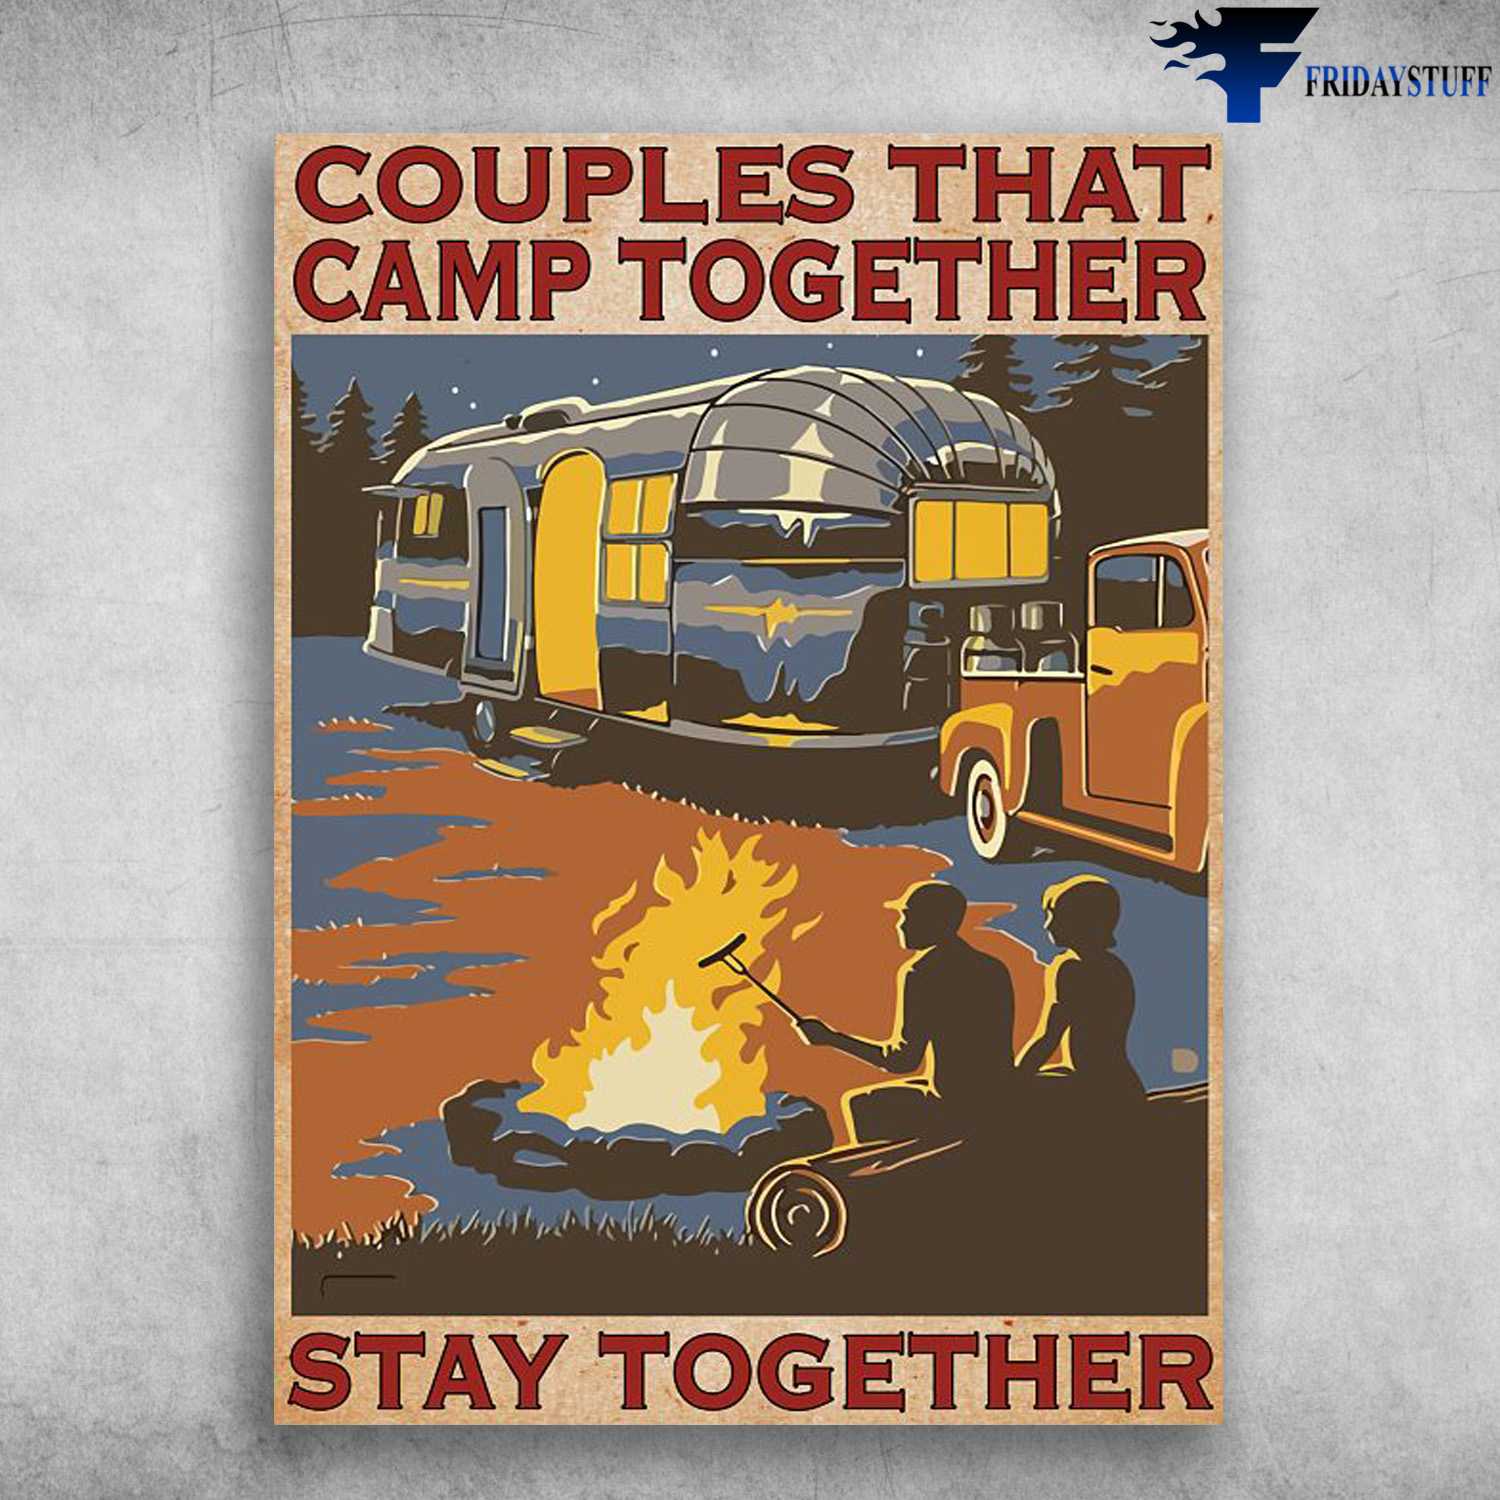 Camping Couple, Camping Lover, Couples That Camp Together, Stay Together